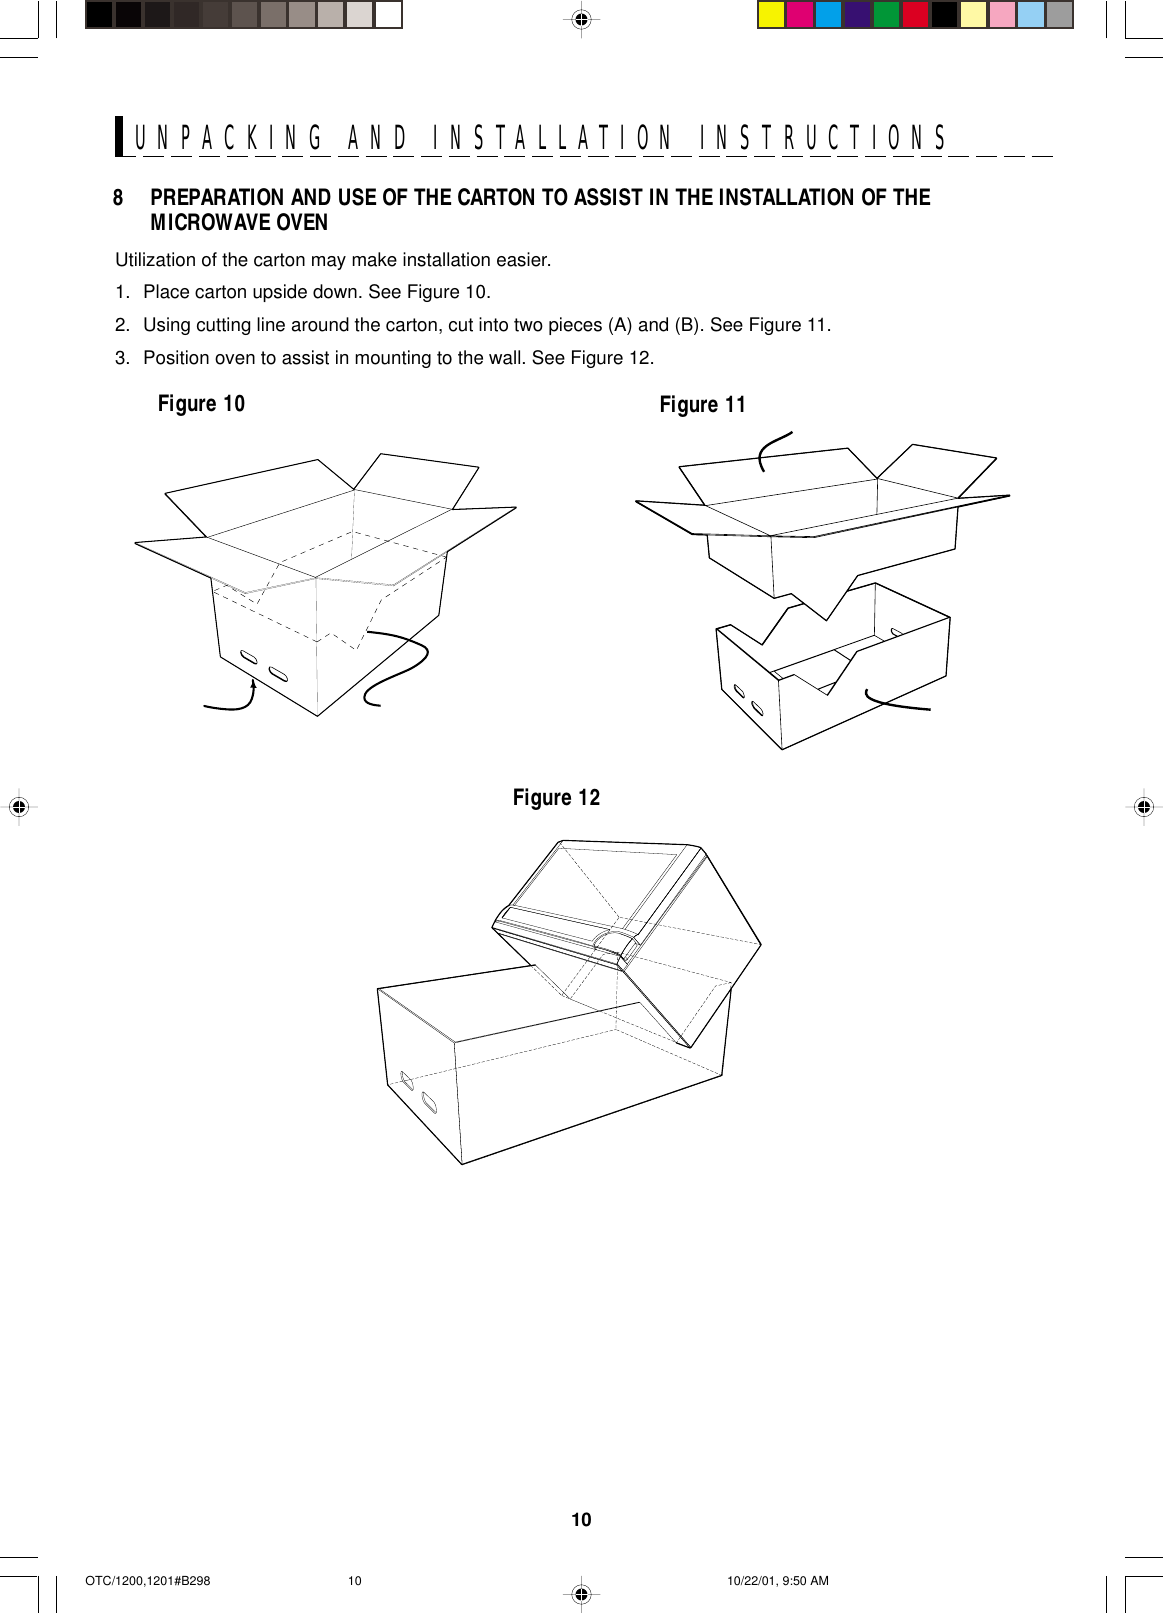 10UNPACKING AND INSTALLATION INSTRUCTIONSUtilization of the carton may make installation easier.1. Place carton upside down. See Figure 10.2. Using cutting line around the carton, cut into two pieces (A) and (B). See Figure 11.3. Position oven to assist in mounting to the wall. See Figure 12.Figure 11Figure 10Figure 128 PREPARATION AND USE OF THE CARTON TO ASSIST IN THE INSTALLATION OF THEMICROWAVE OVENOTC/1200,1201#B298 10/22/01, 9:50 AM10